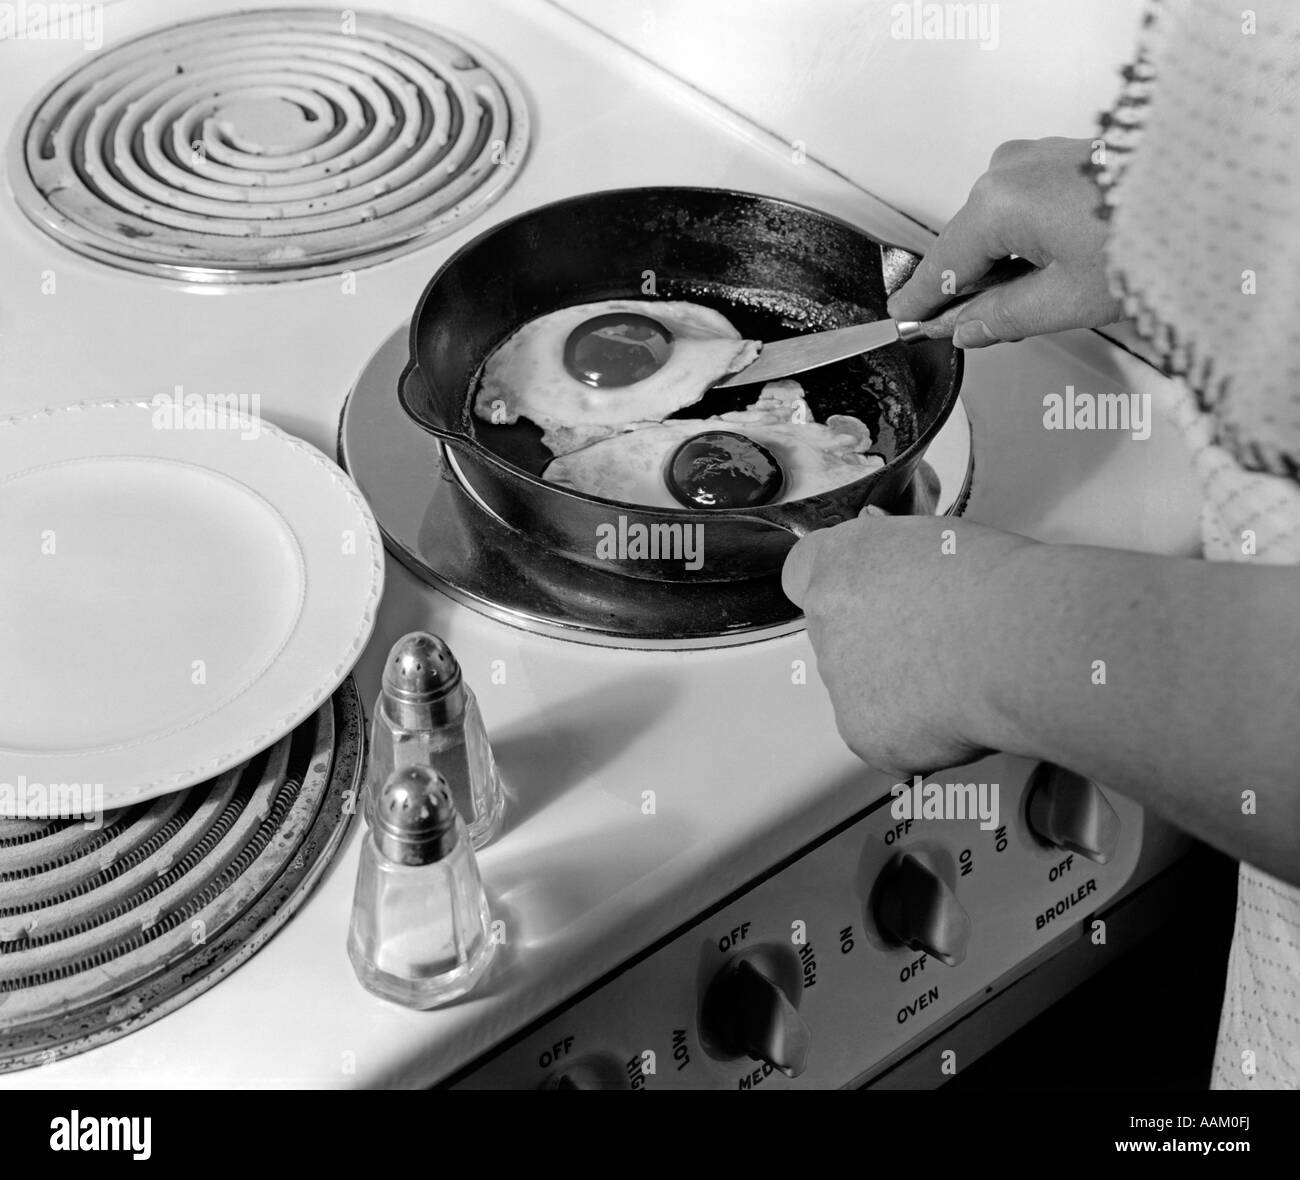 1940s 1950s WOMAN HANDS FRYING EGGS IN IRON SKILLET ON ELECTRIC STOVE SALT AND PEPPER SHAKERS Stock Photo